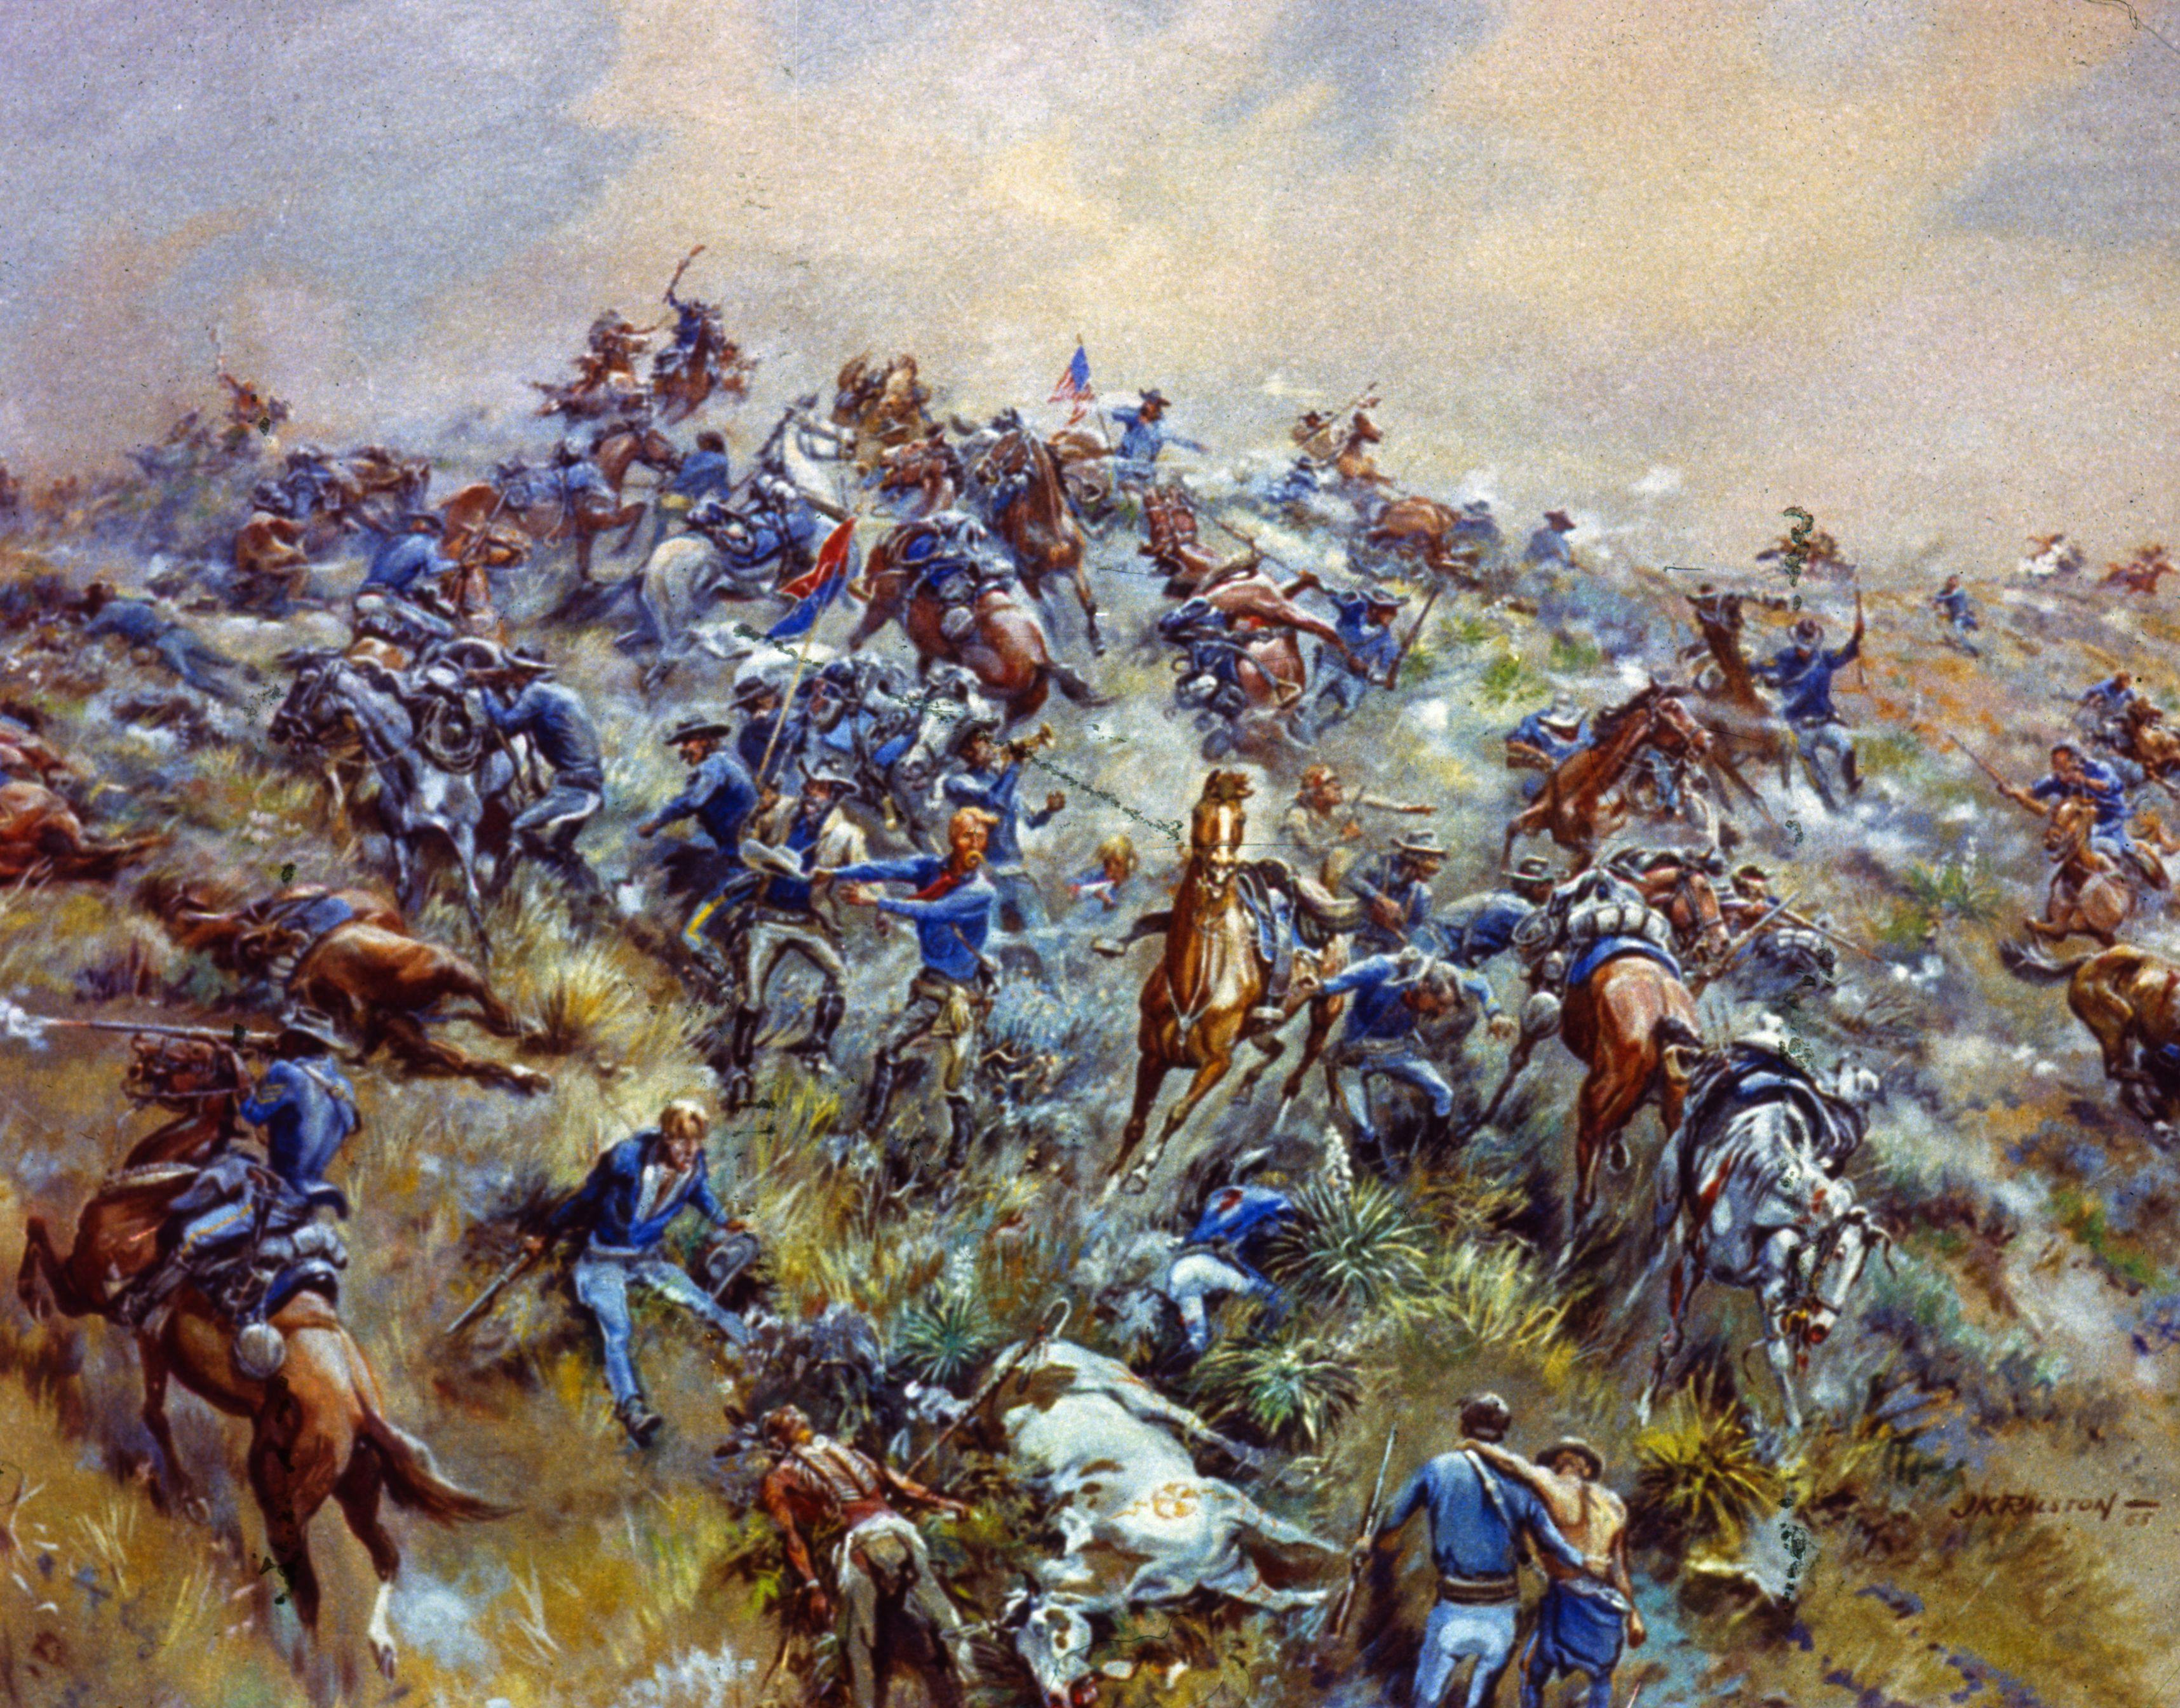 what happened at the battle of little bighorn in 1876